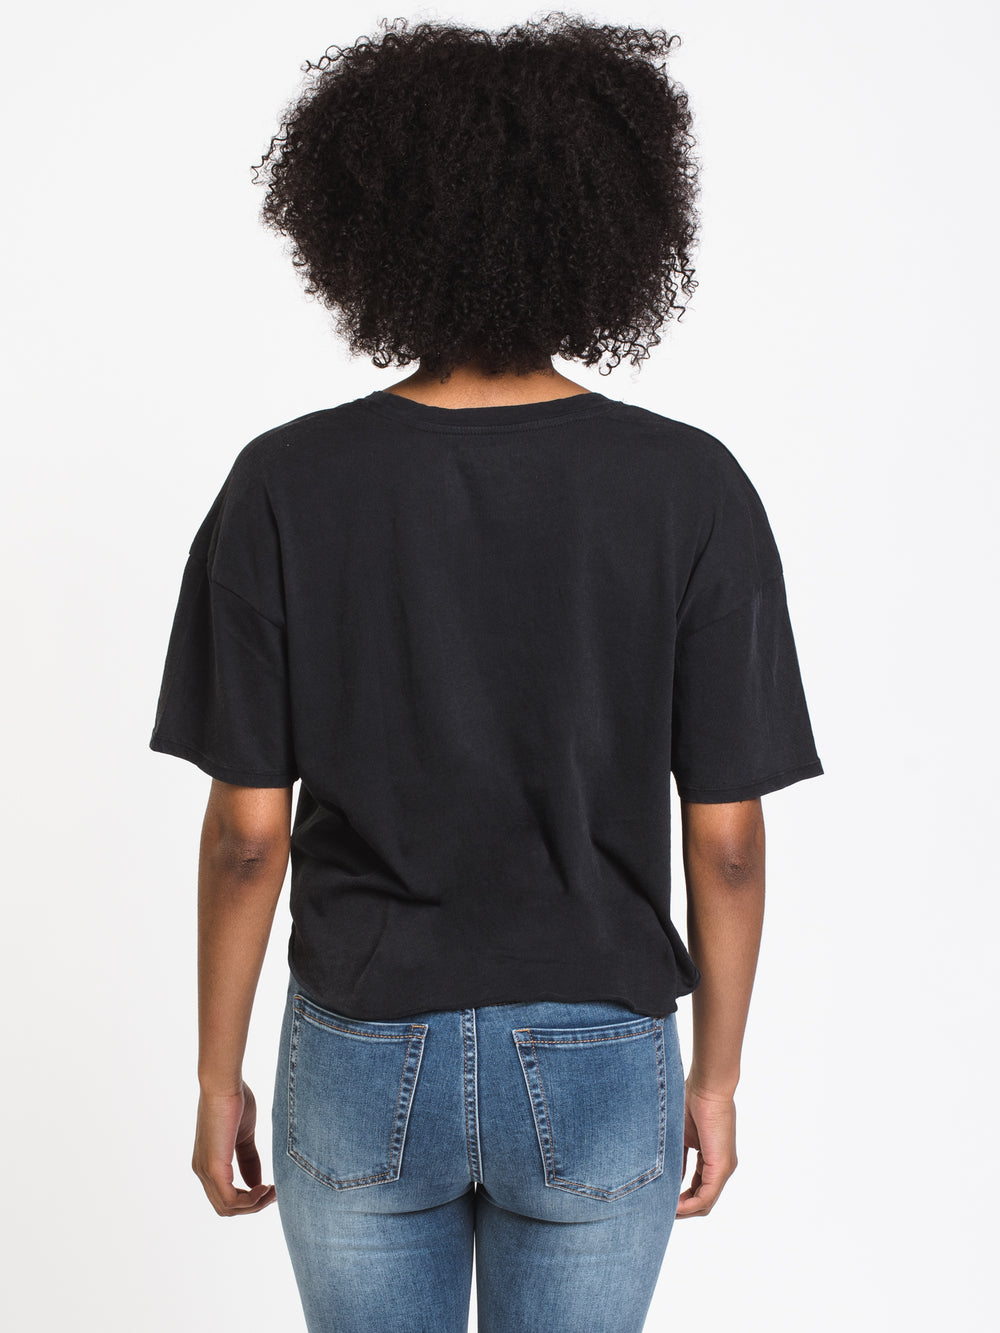 WOMENS PIPER BOXY TEE - CLEARANCE